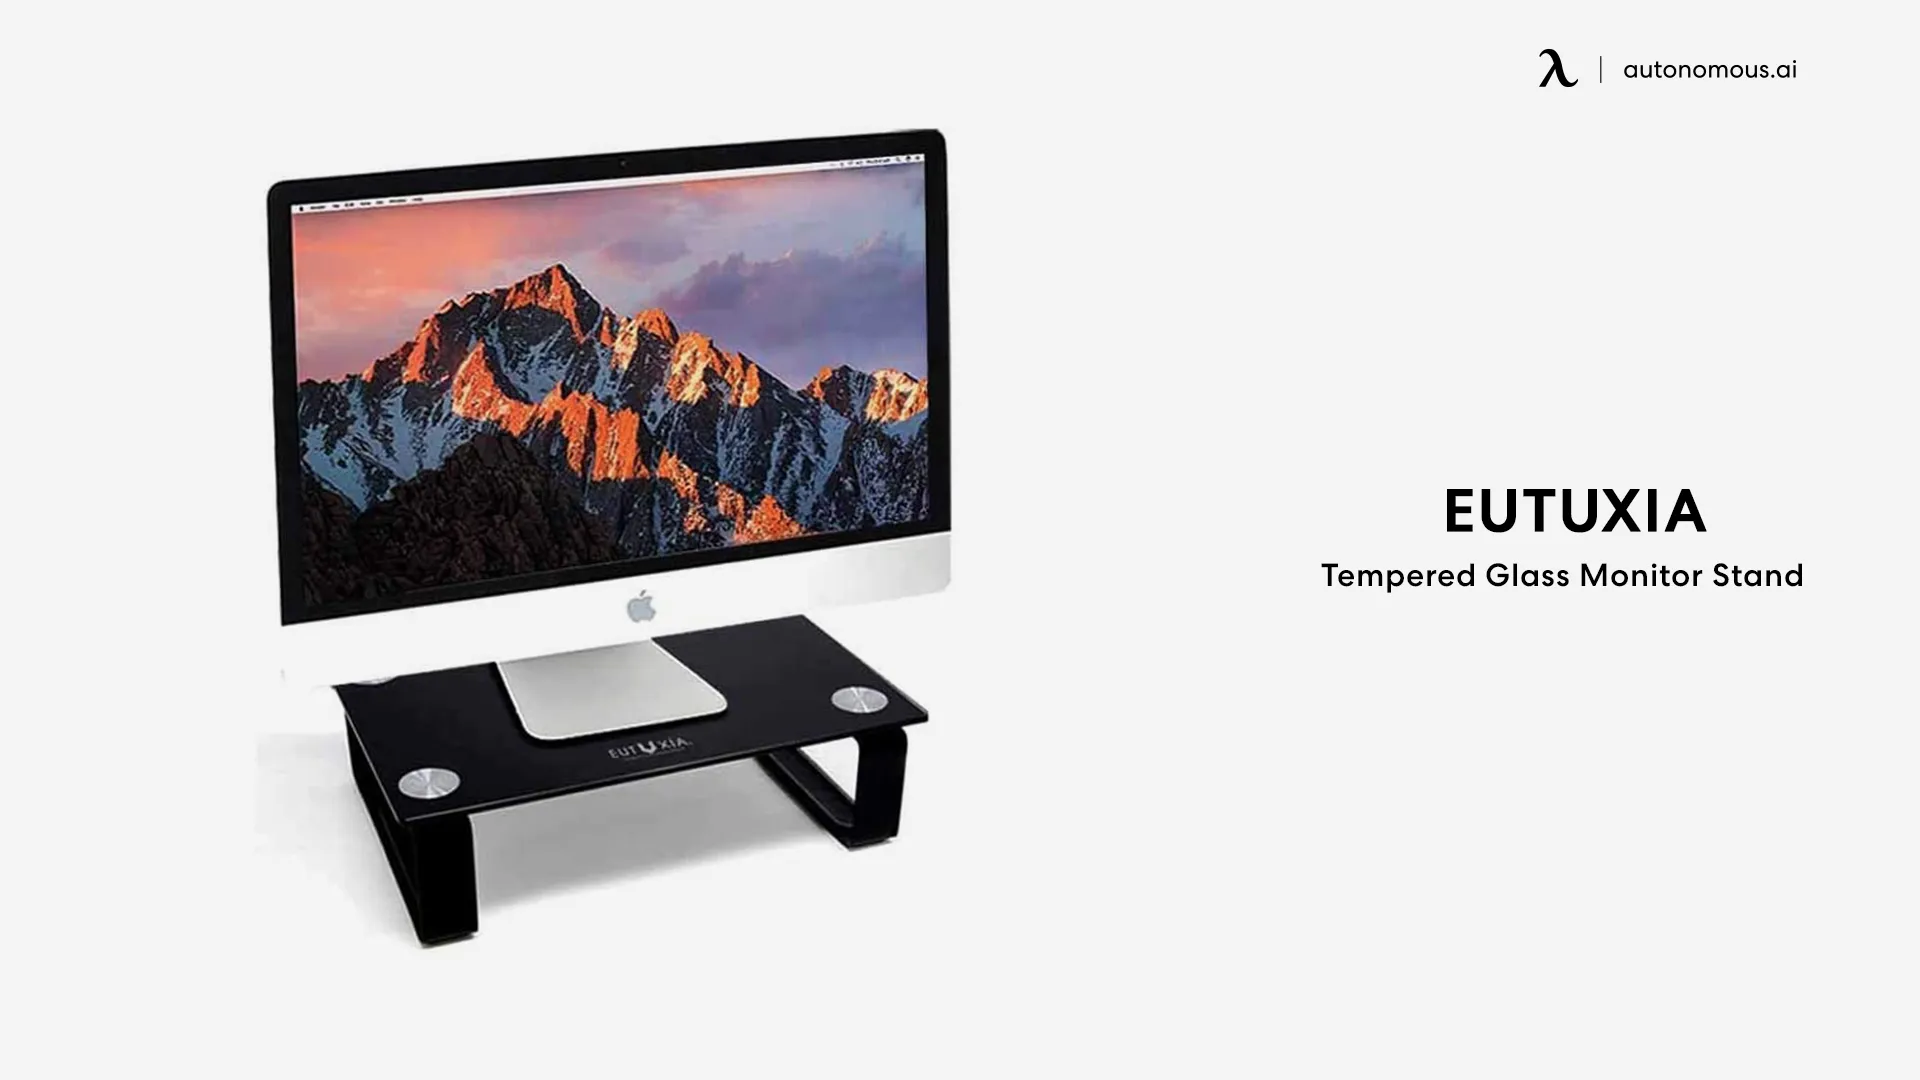 Eutuxia Type-M Tempered Glass Monitor Stand